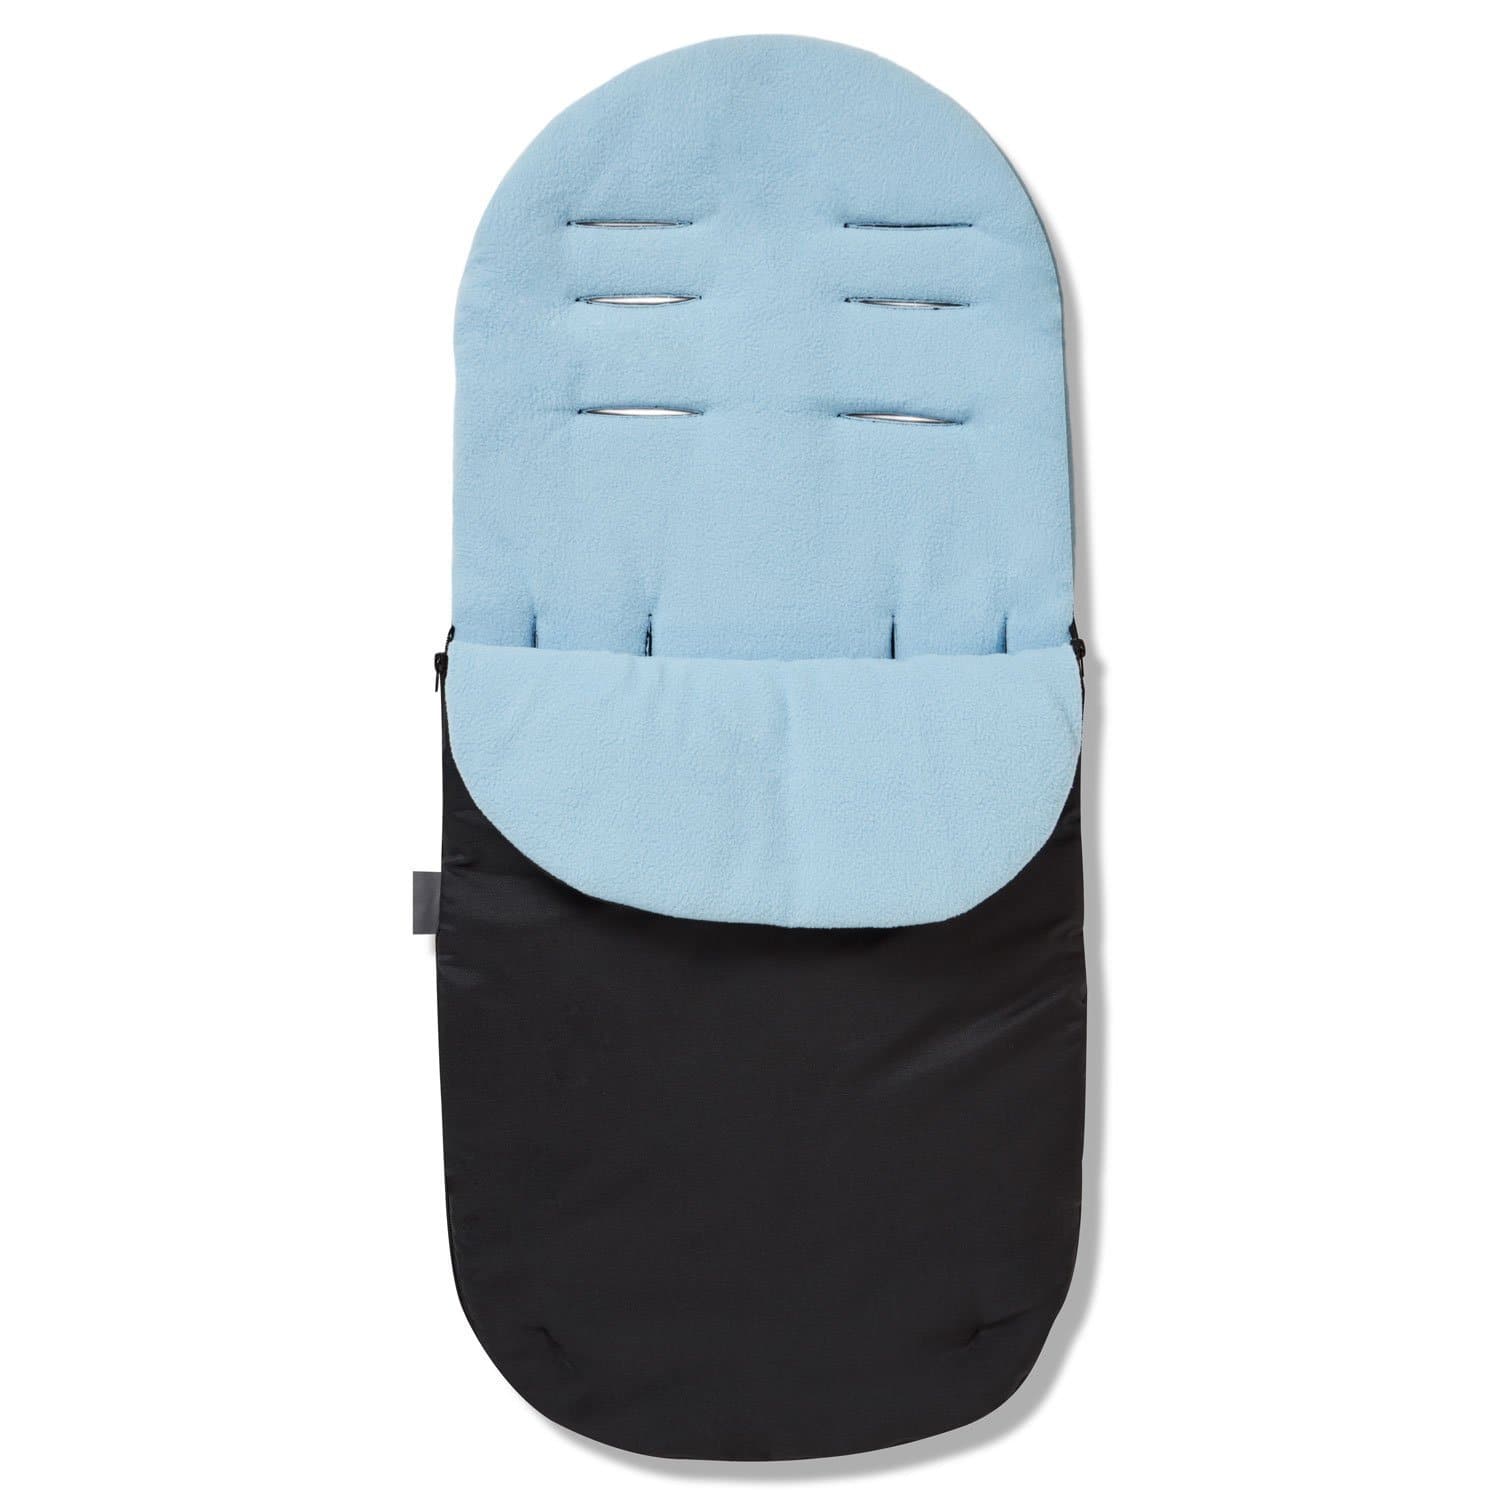 Footmuff / Cosy Toes Compatible with Hybrid - For Your Little One